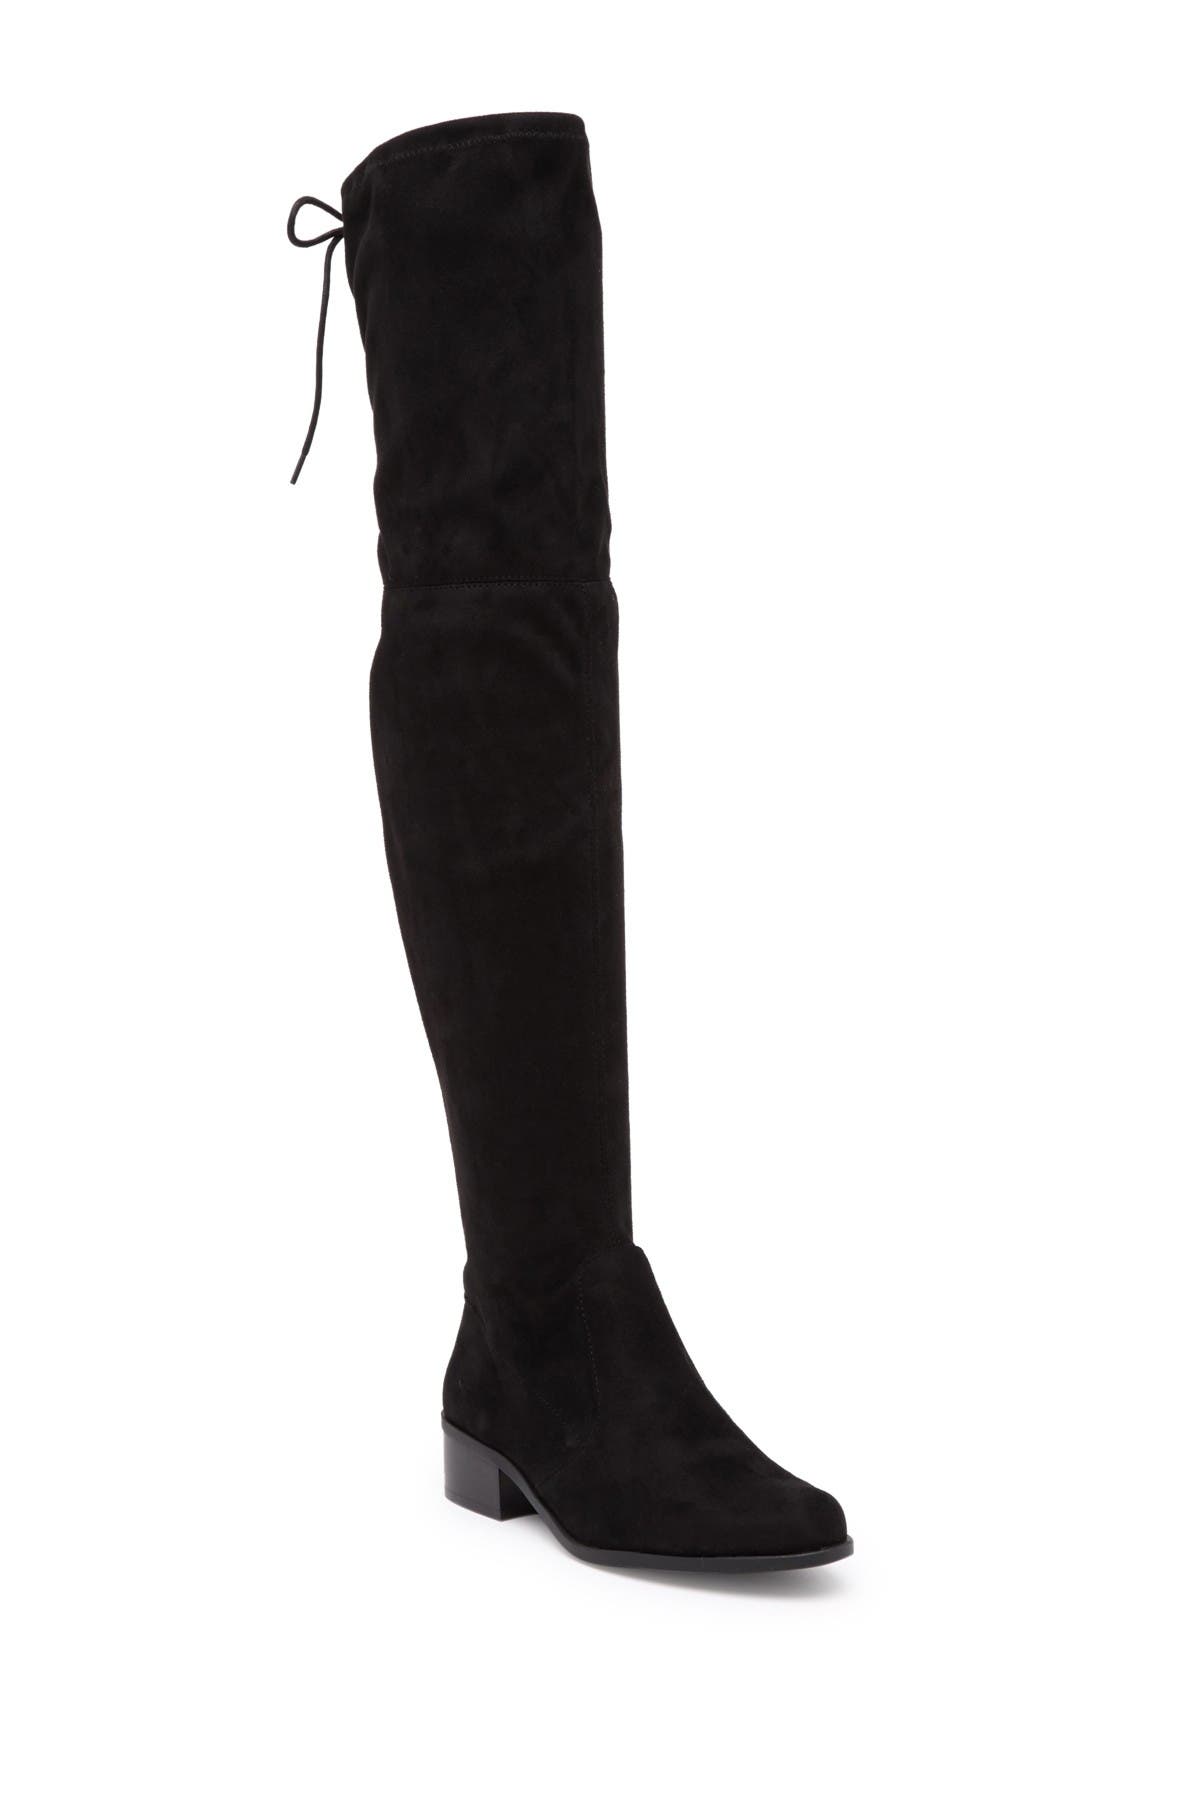 Charles David Gammon Boot in Black-ms Black Womens Shoes Boots Knee-high boots 